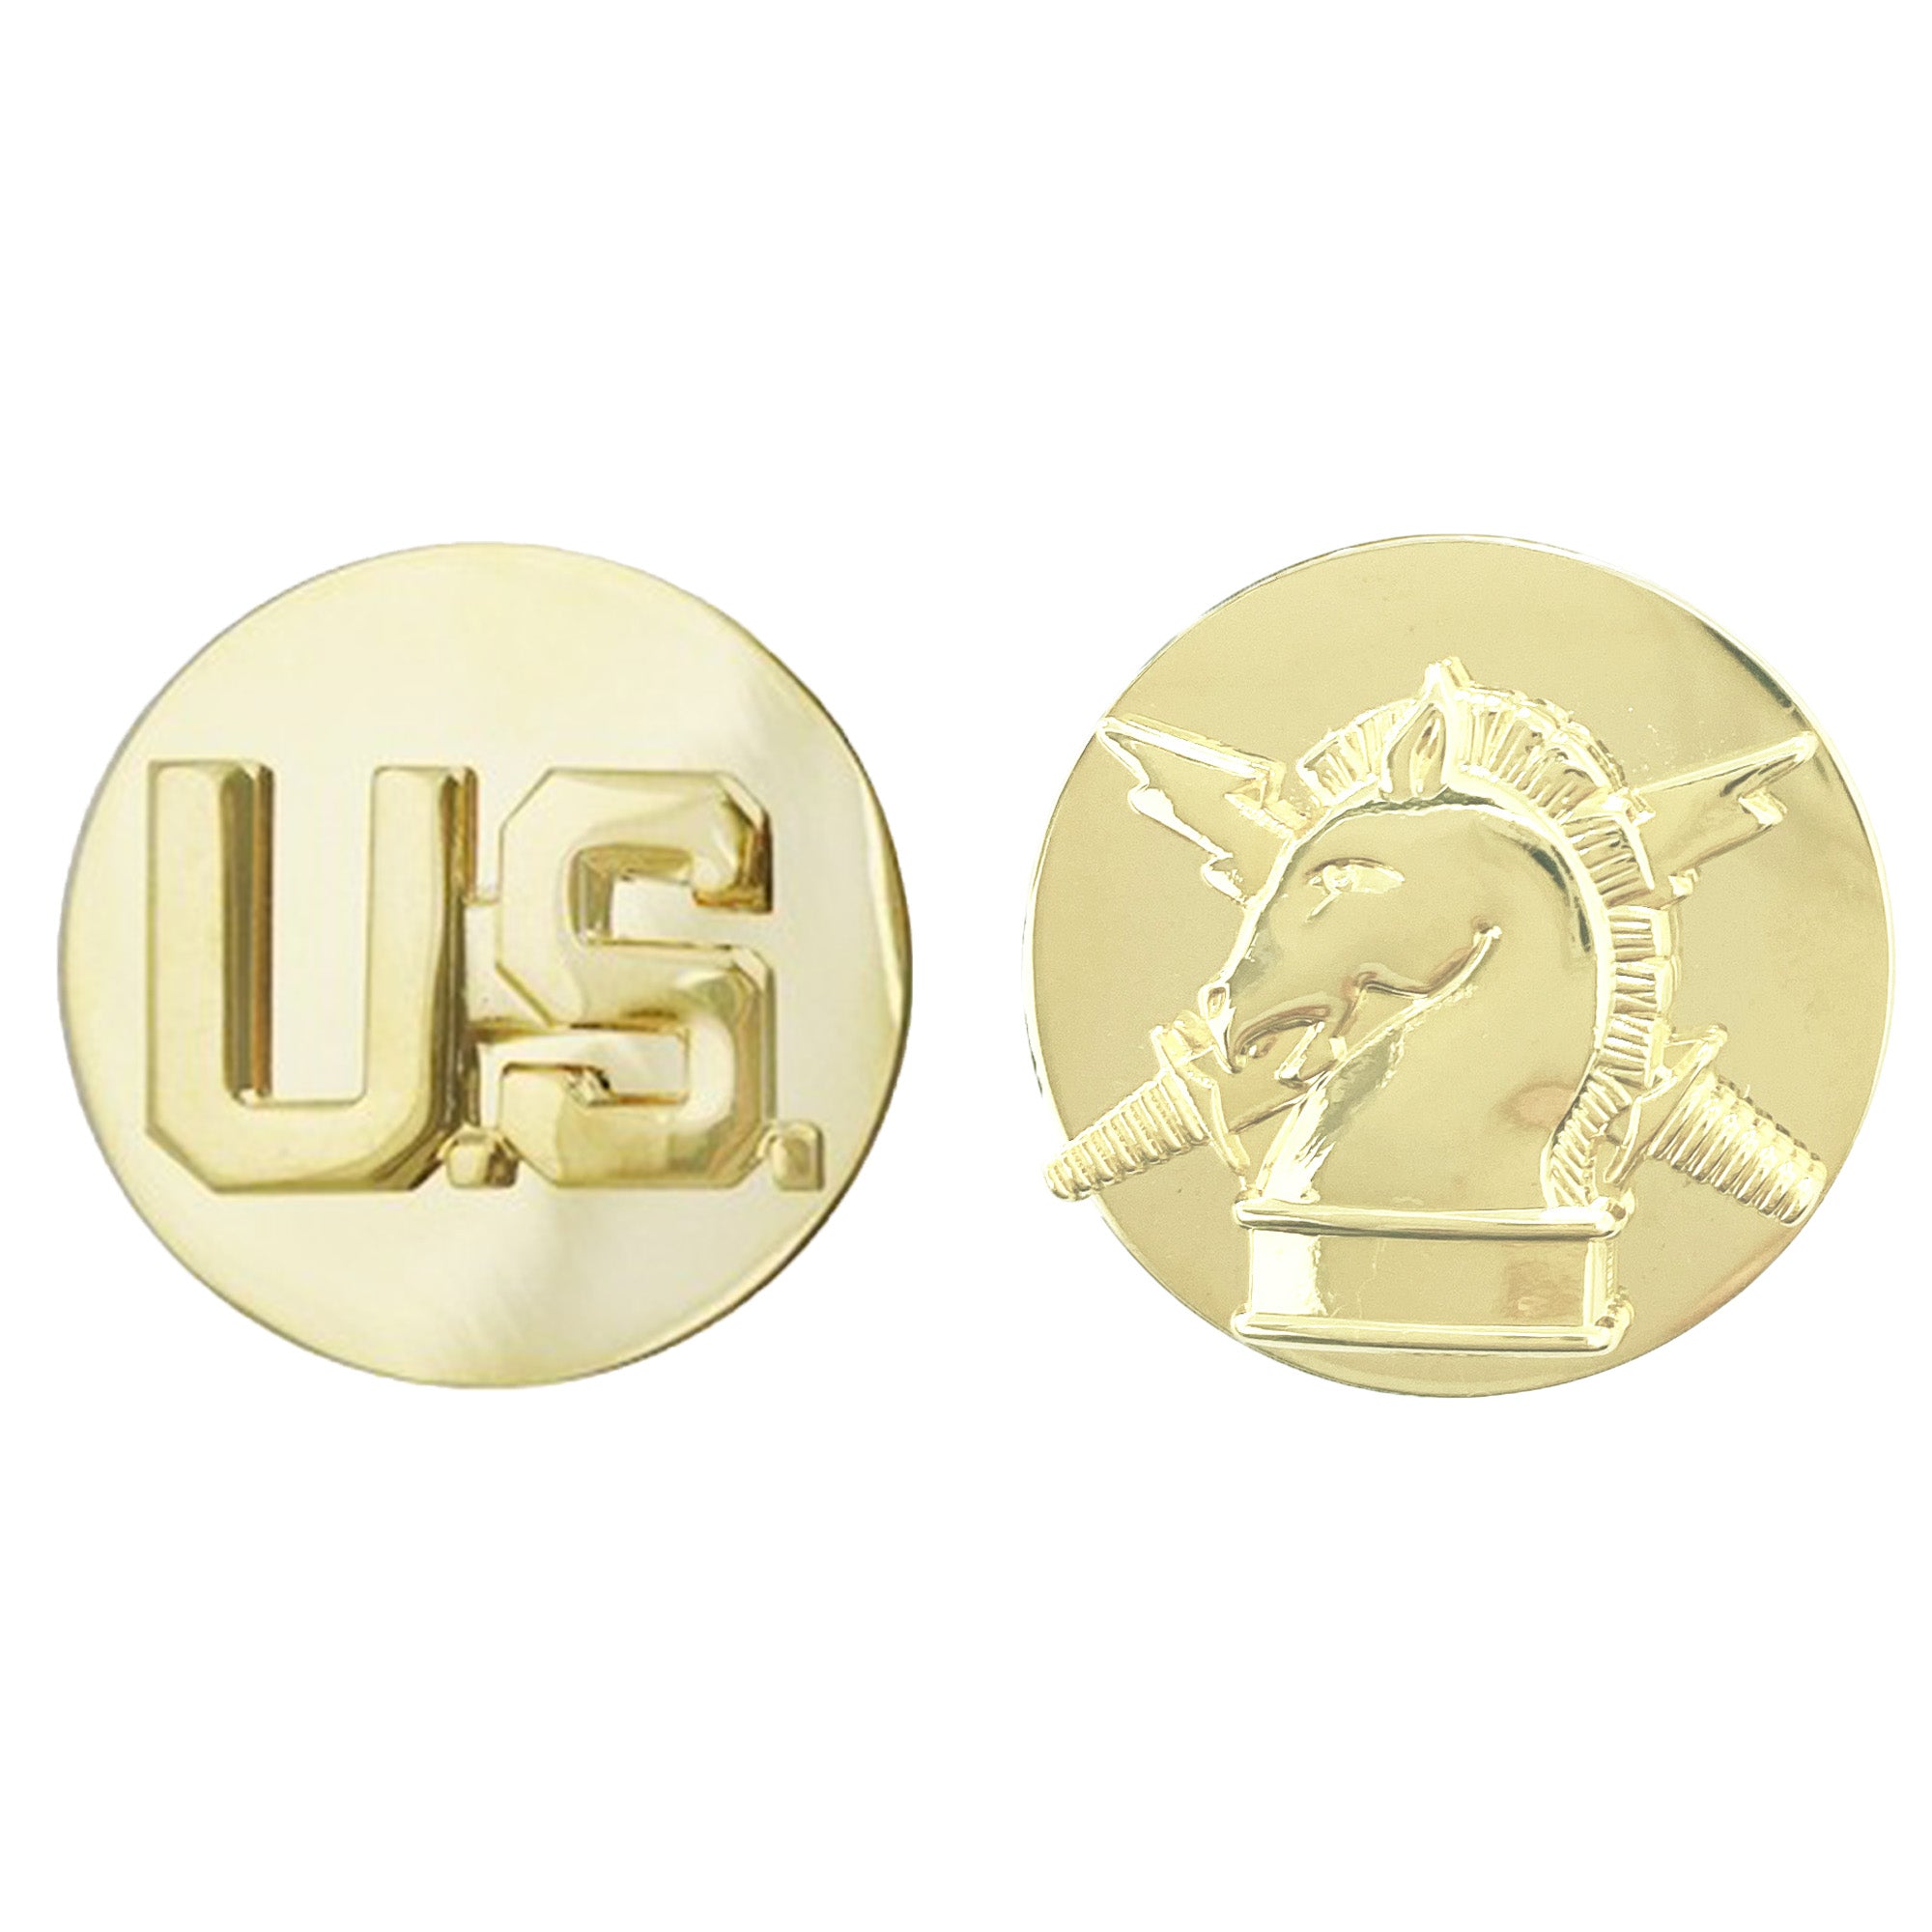 Psychological Operations & U.S. Enlisted Brite Pin-on - Insignia Depot